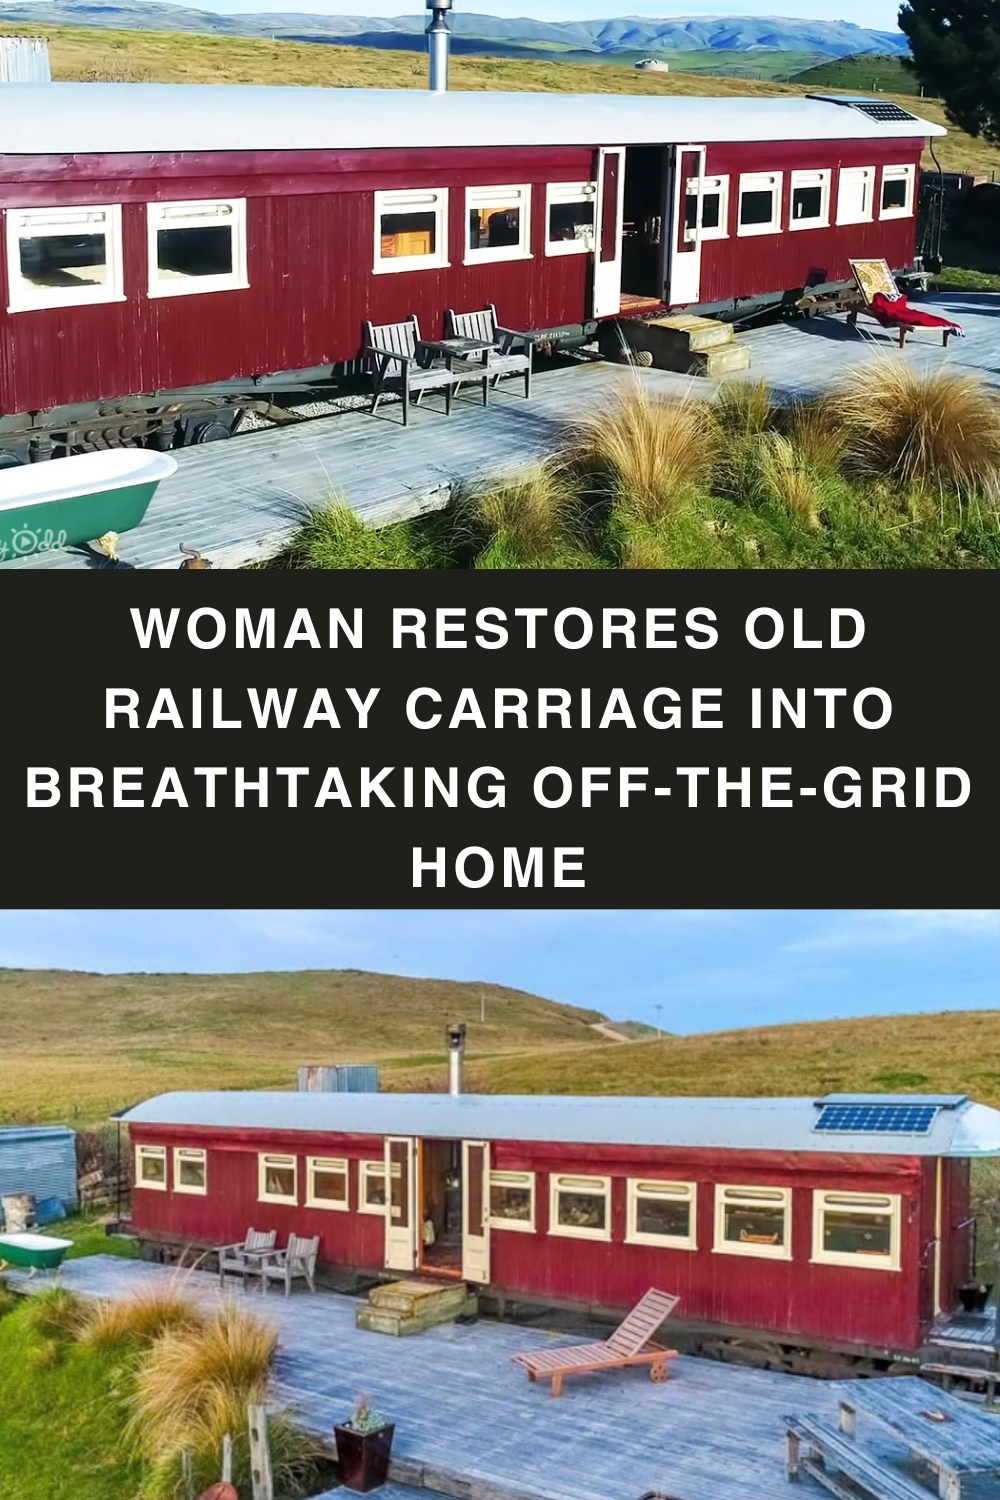 Woman restores old railway carriage into breathtaking off-the-grid home with spectacular views pin